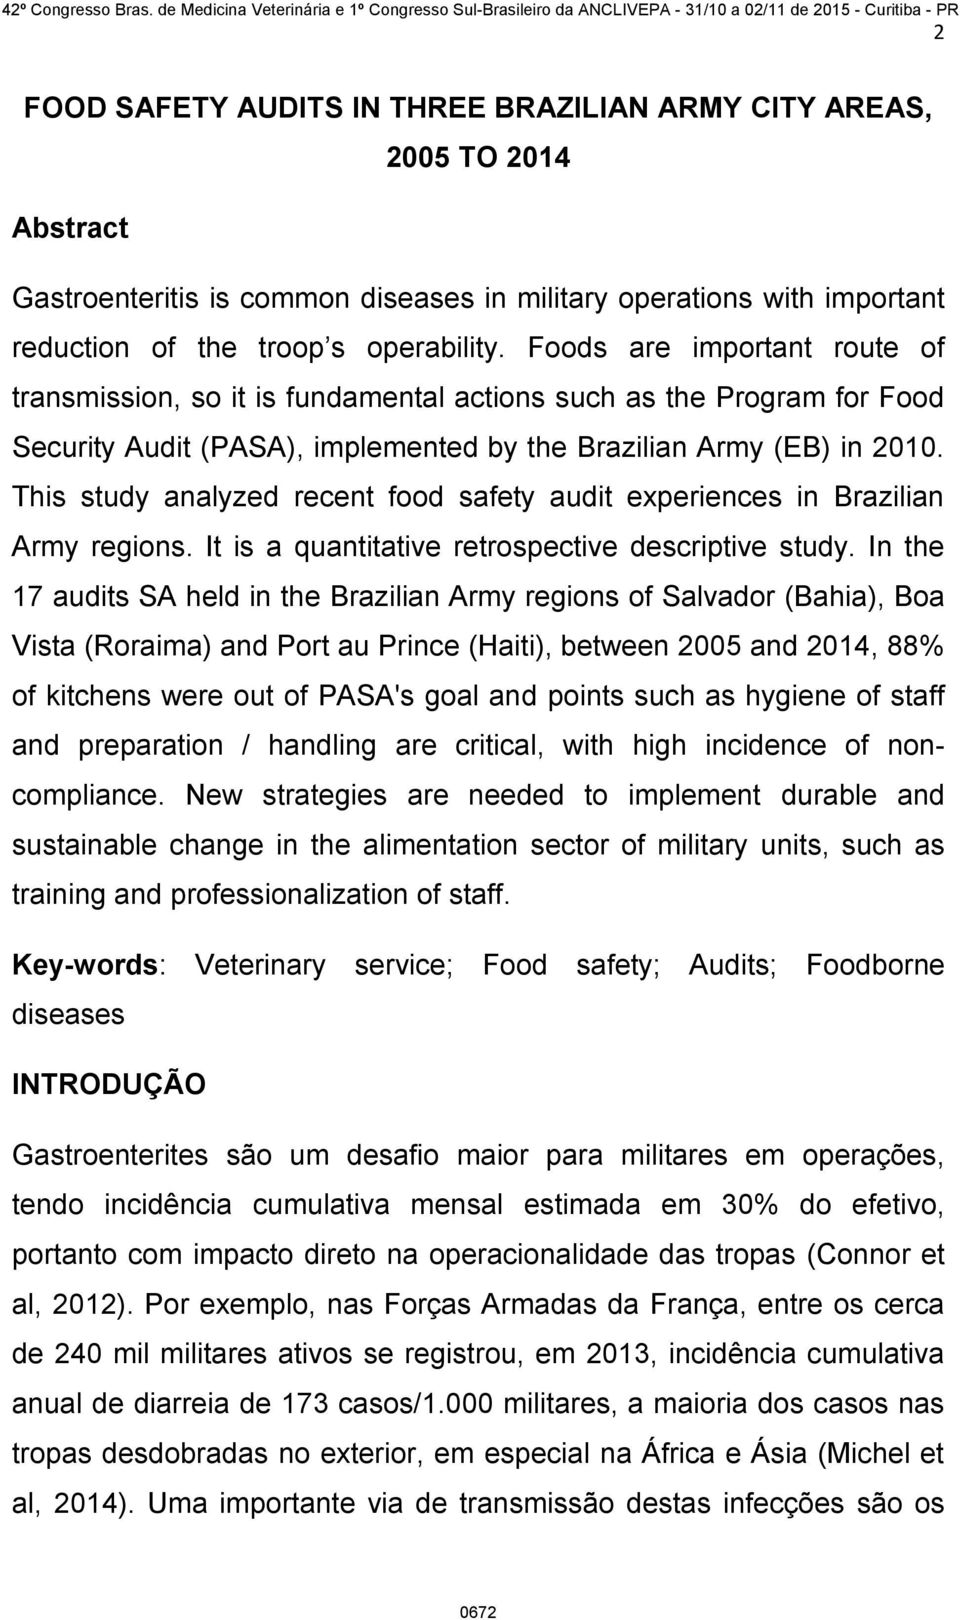 This study analyzed recent food safety audit experiences in Brazilian Army regions. It is a quantitative retrospective descriptive study.